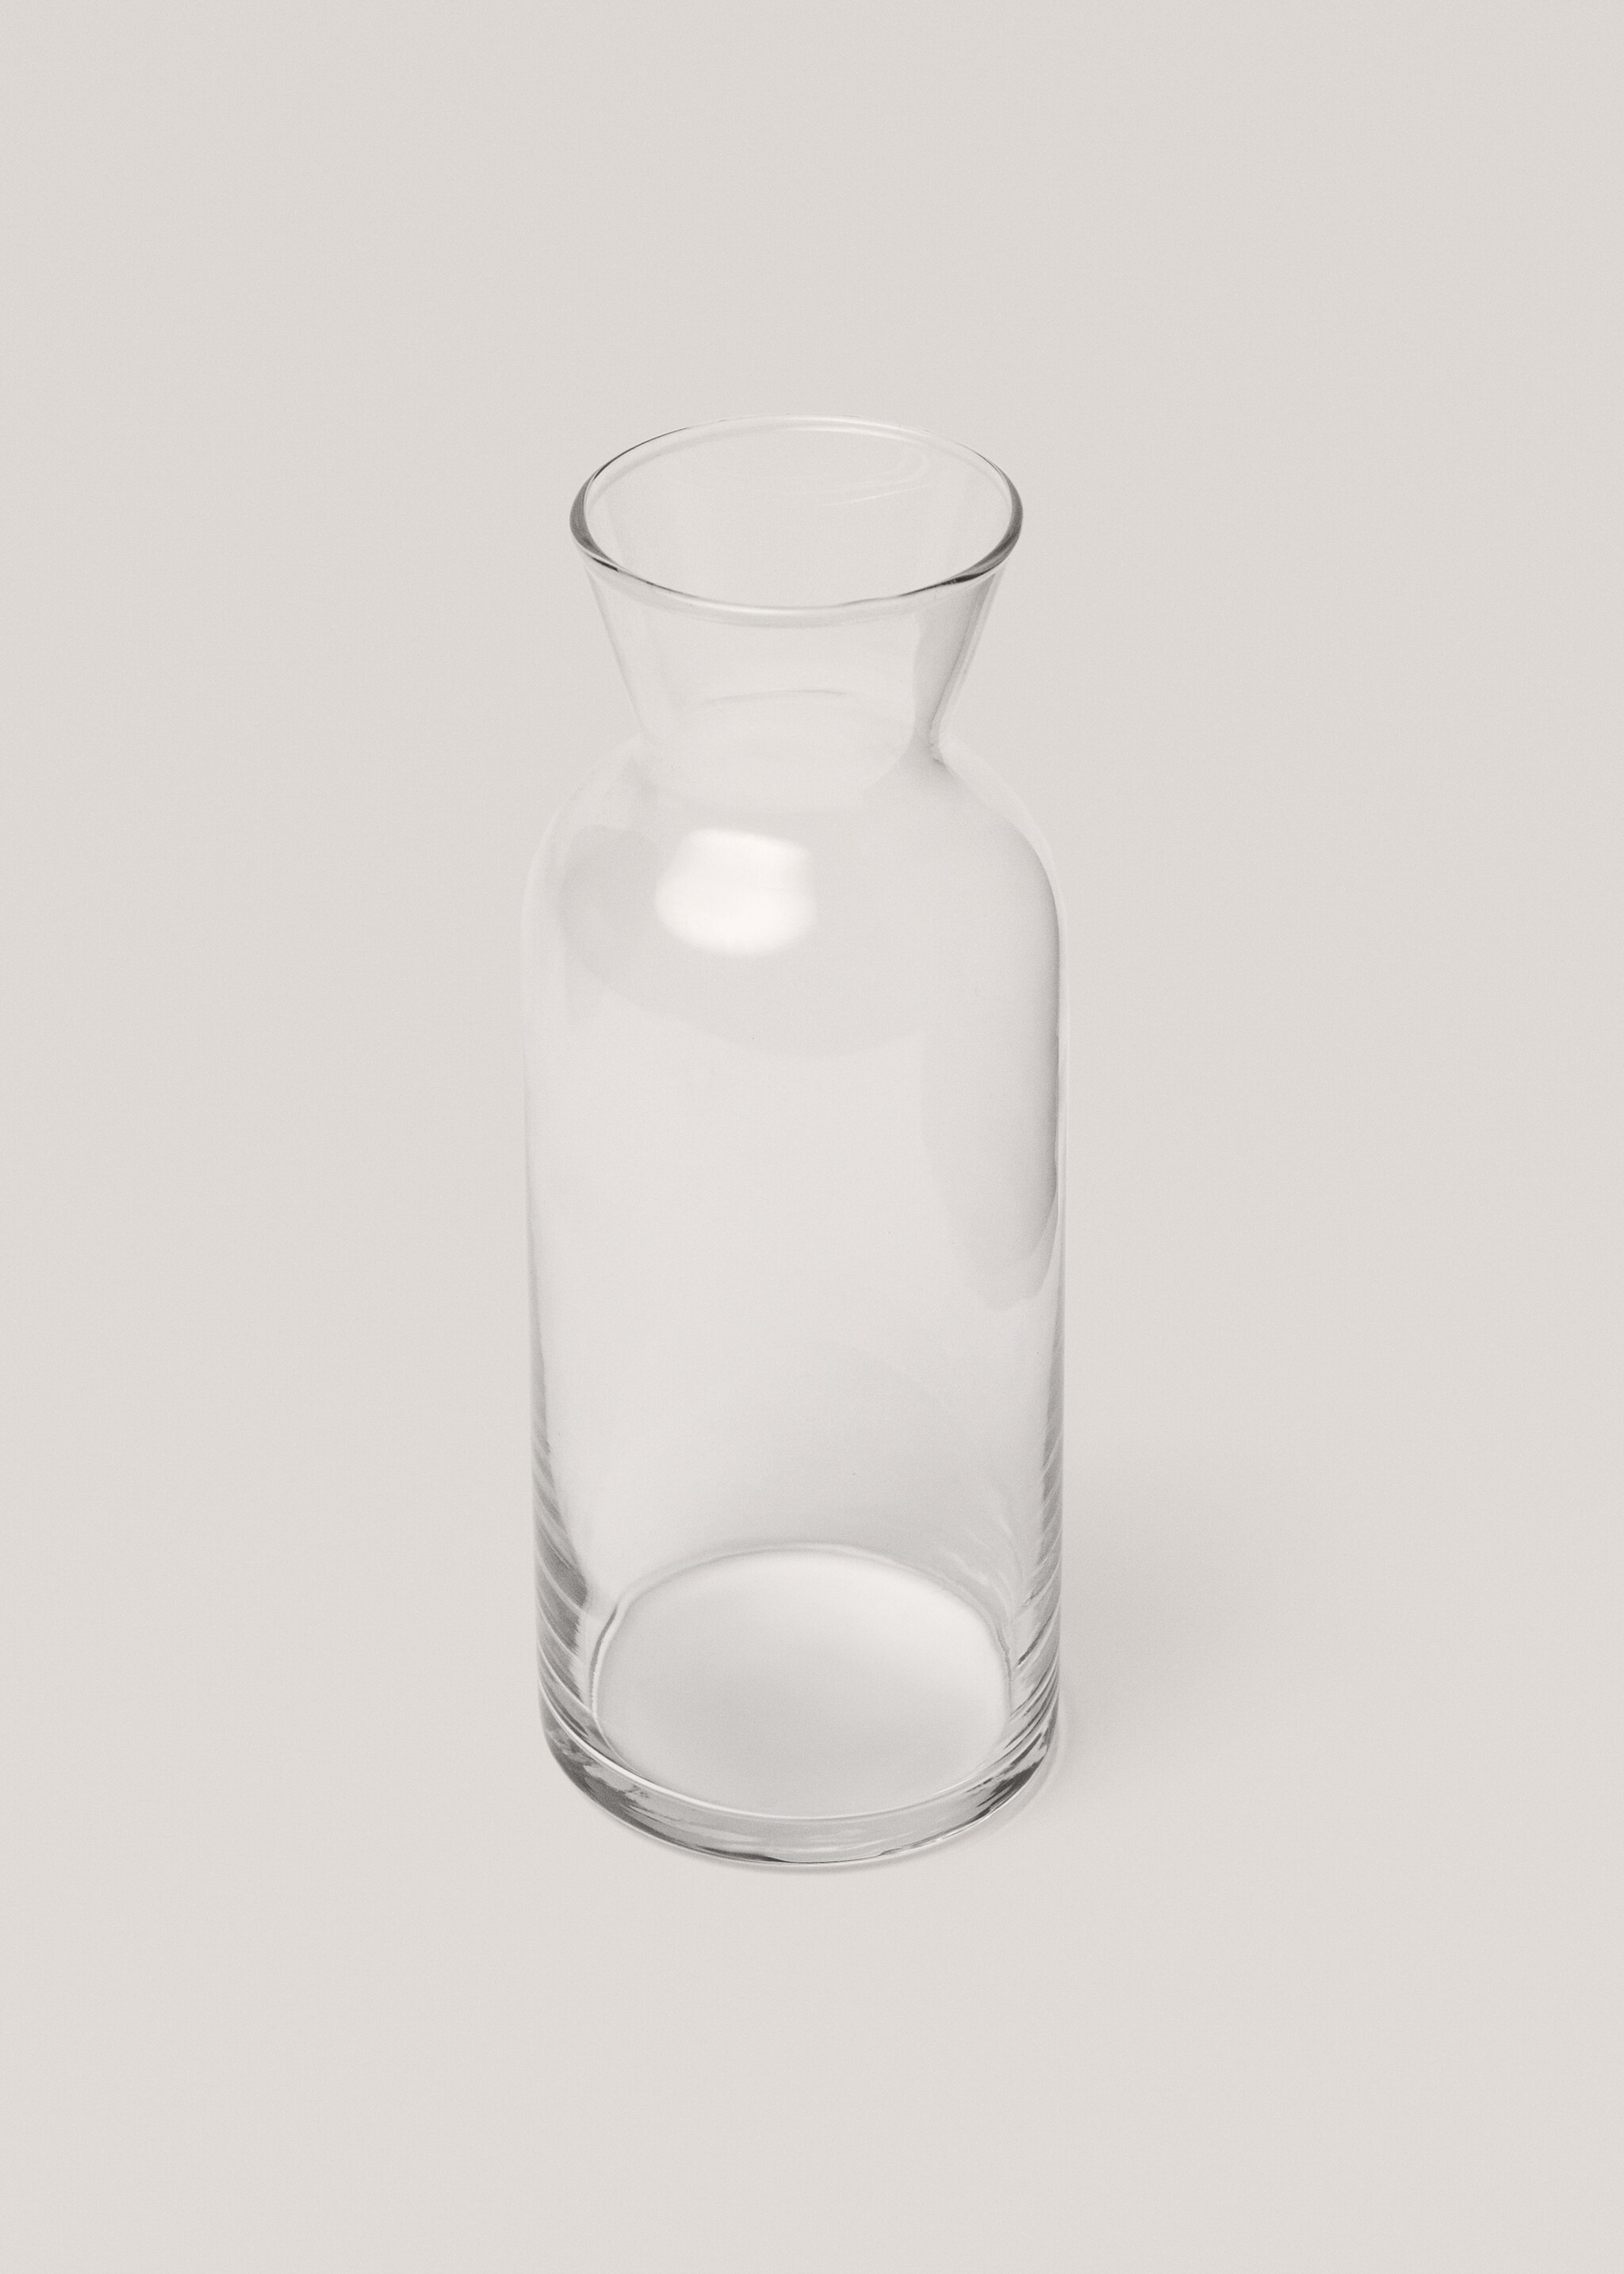 Bottle and glass pack - Details of the article 3